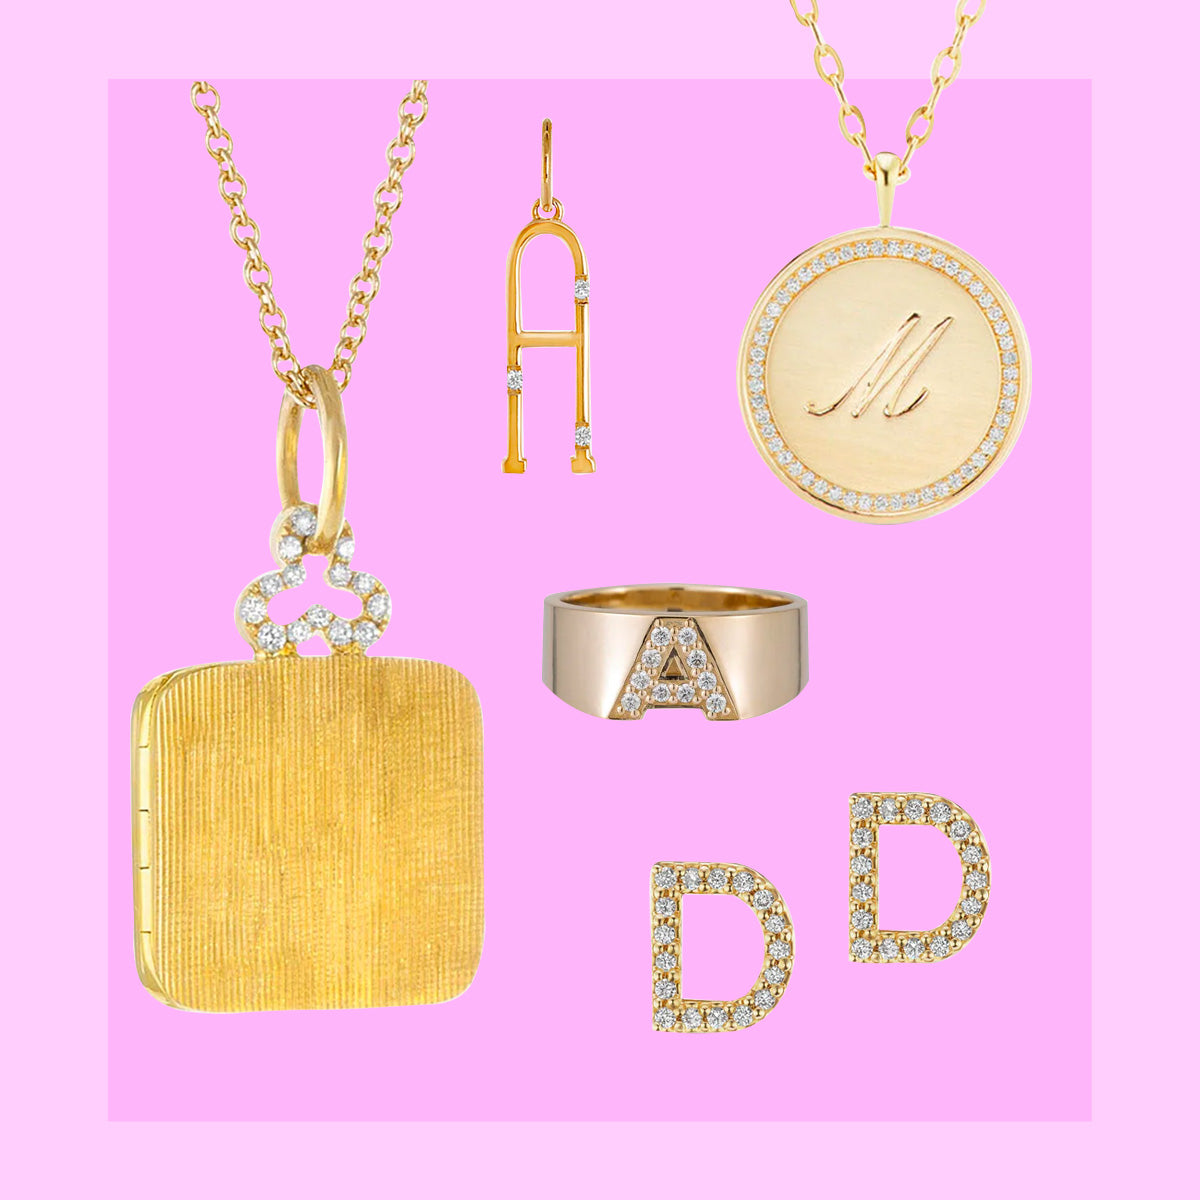 Mother’s Day Gift Guide: Timeless Treasures